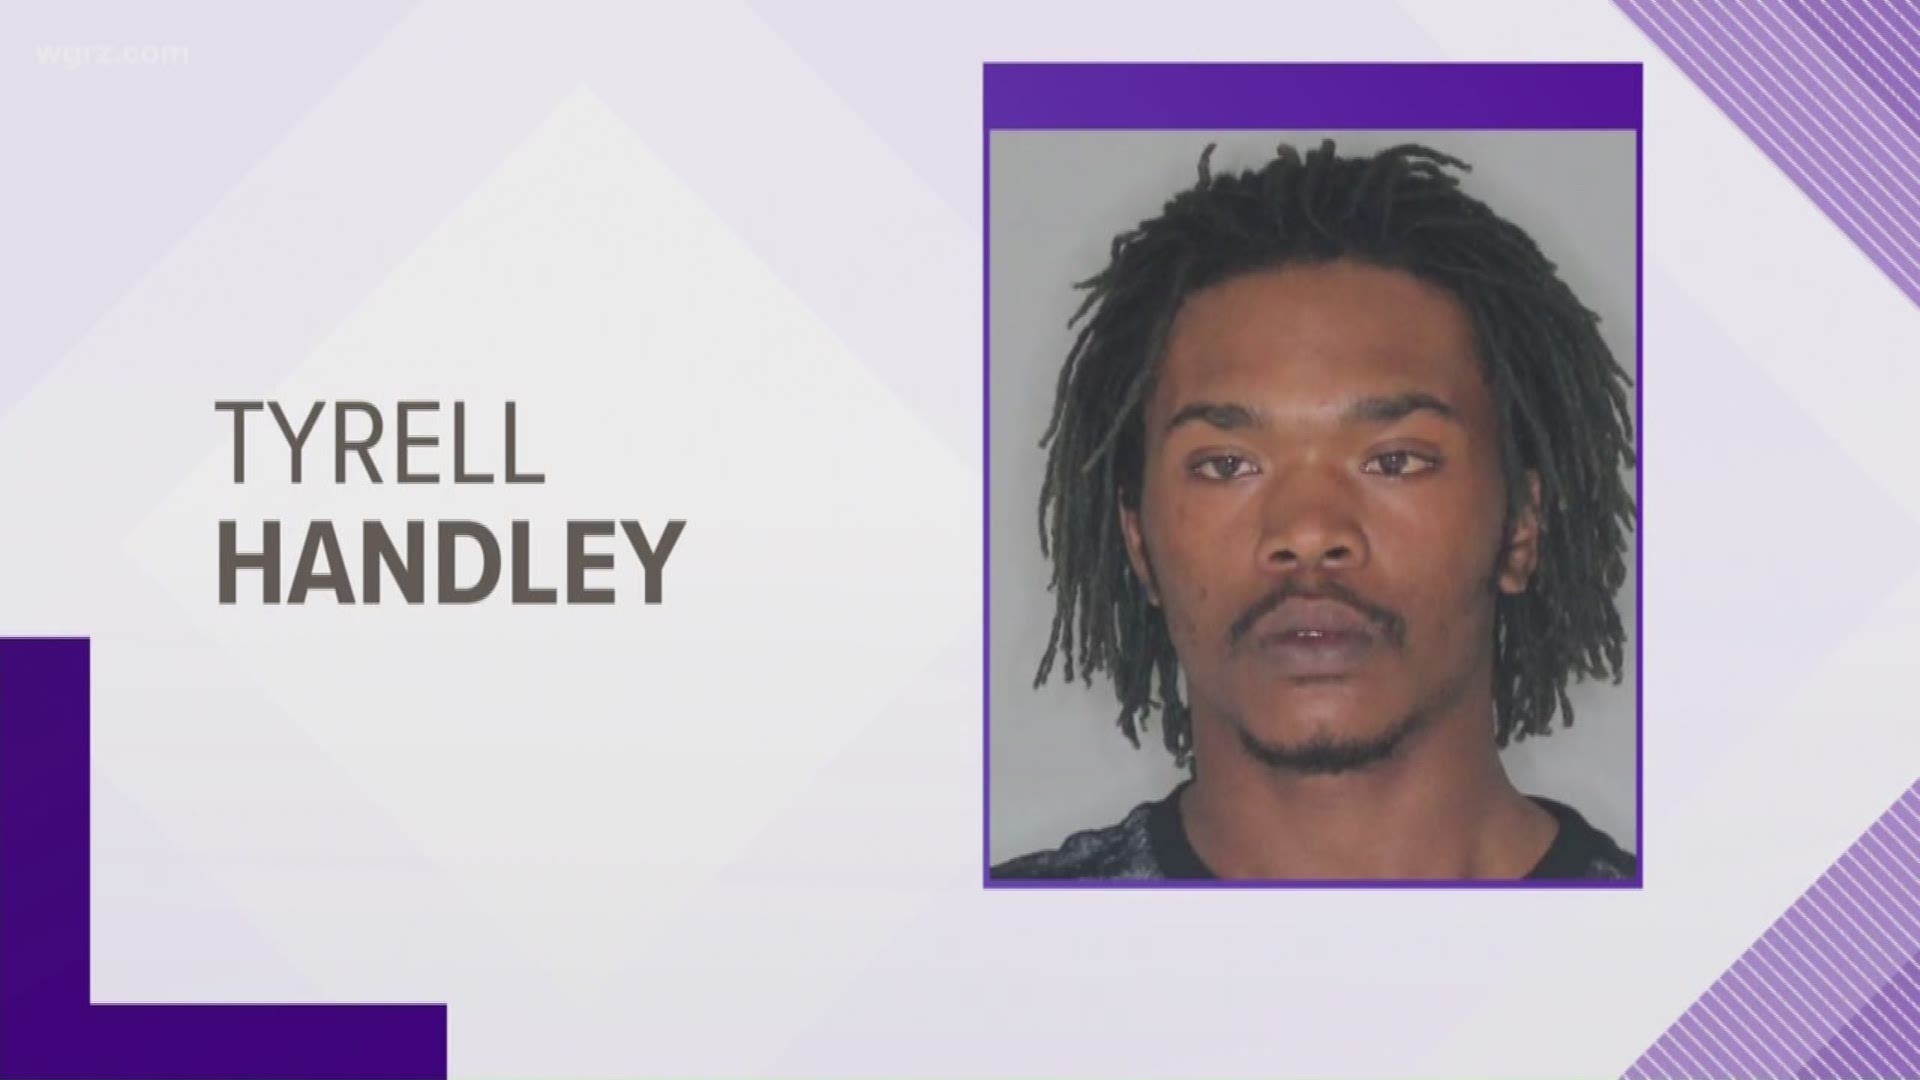 U-S Marshals Service announced the arrest of Tyrell Handley this morning.